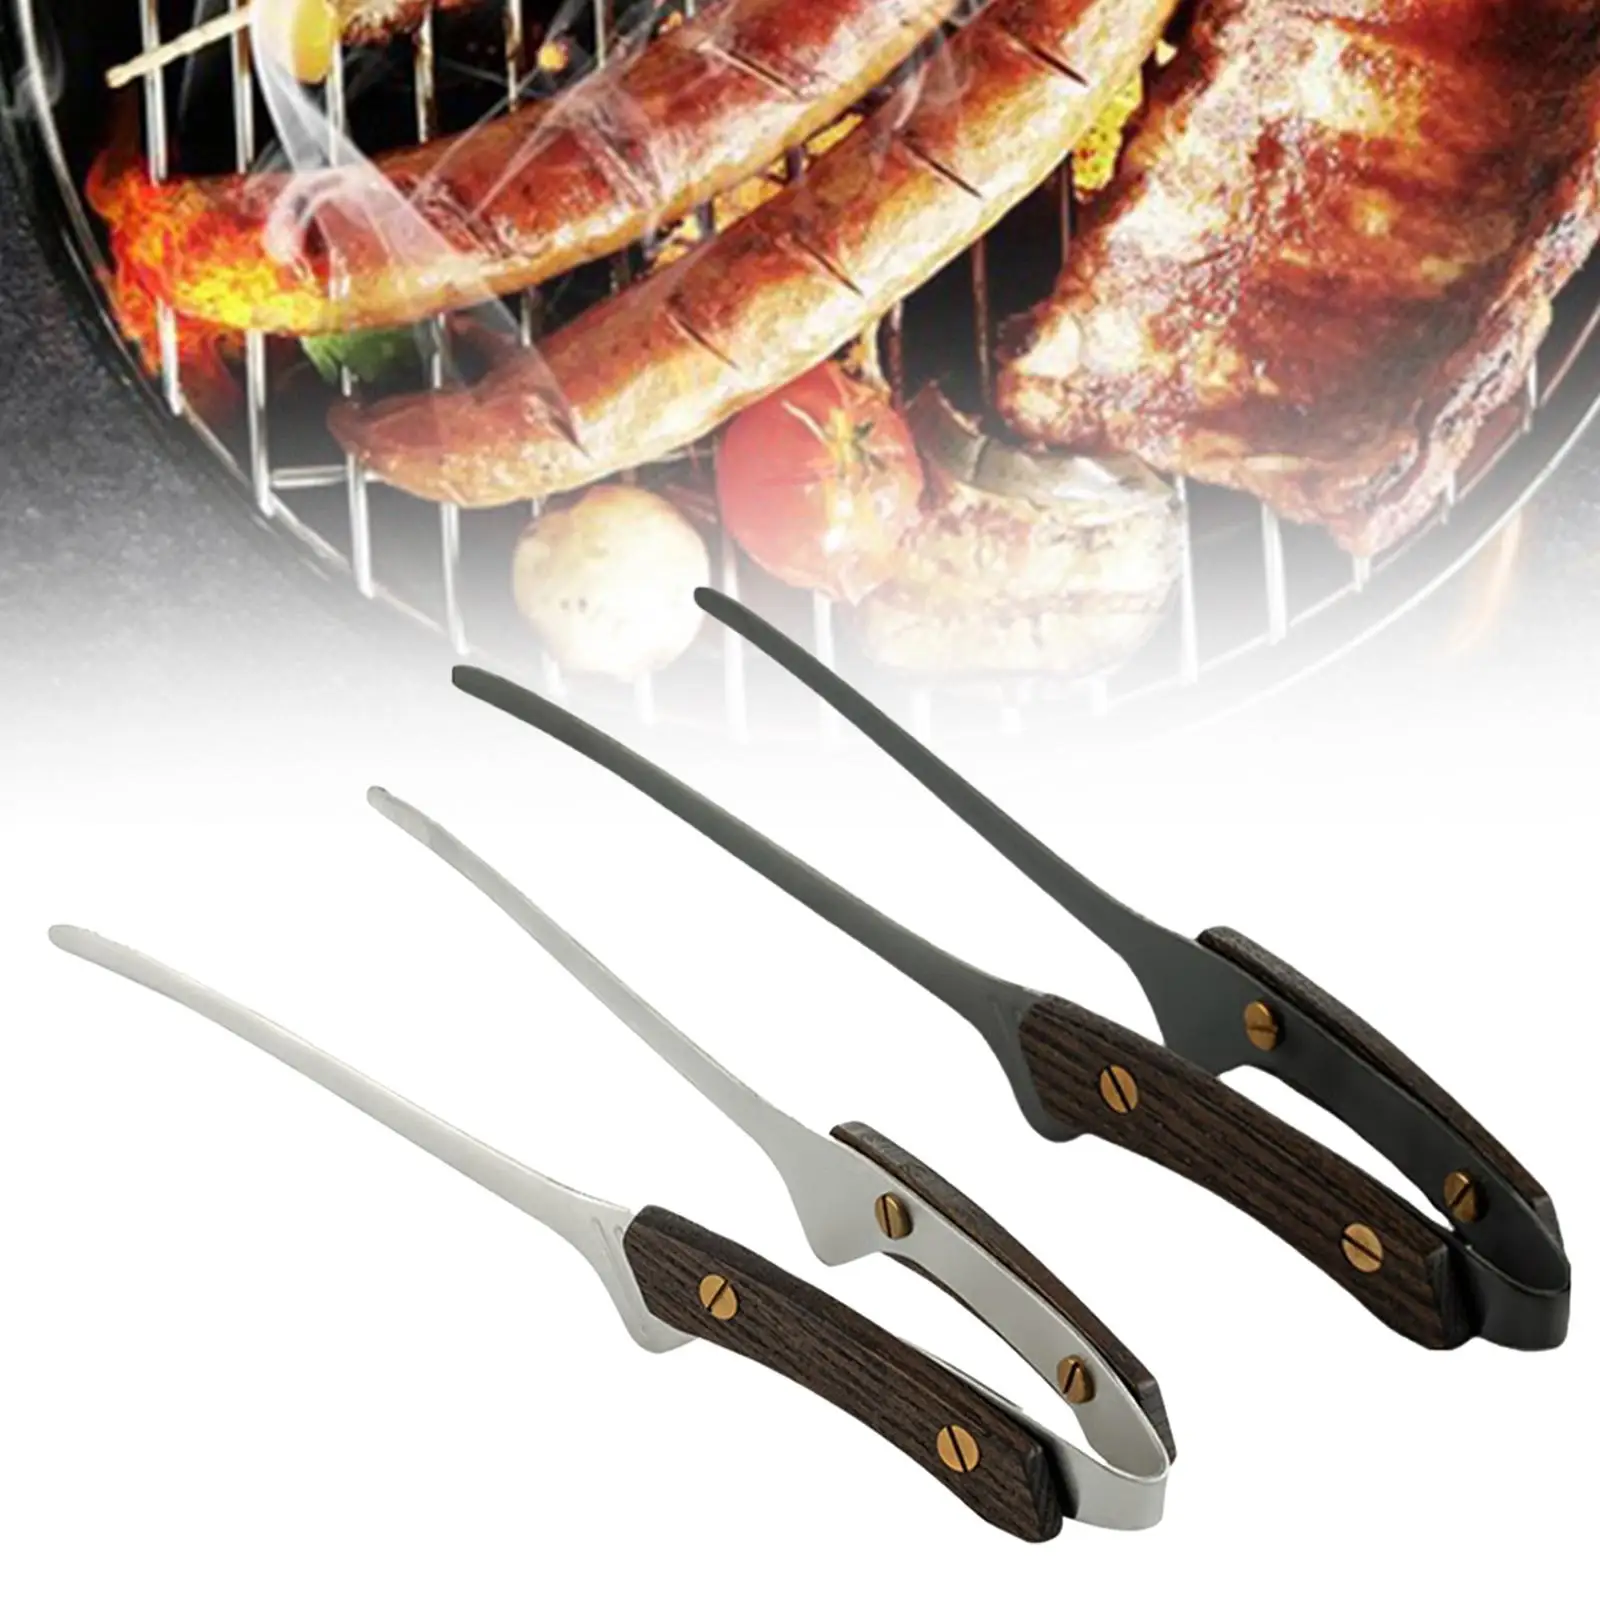 BBQ Tongs Tweezer Salads Vegetable Clamp Non Slip Heavy Duty Barbecue Tongs